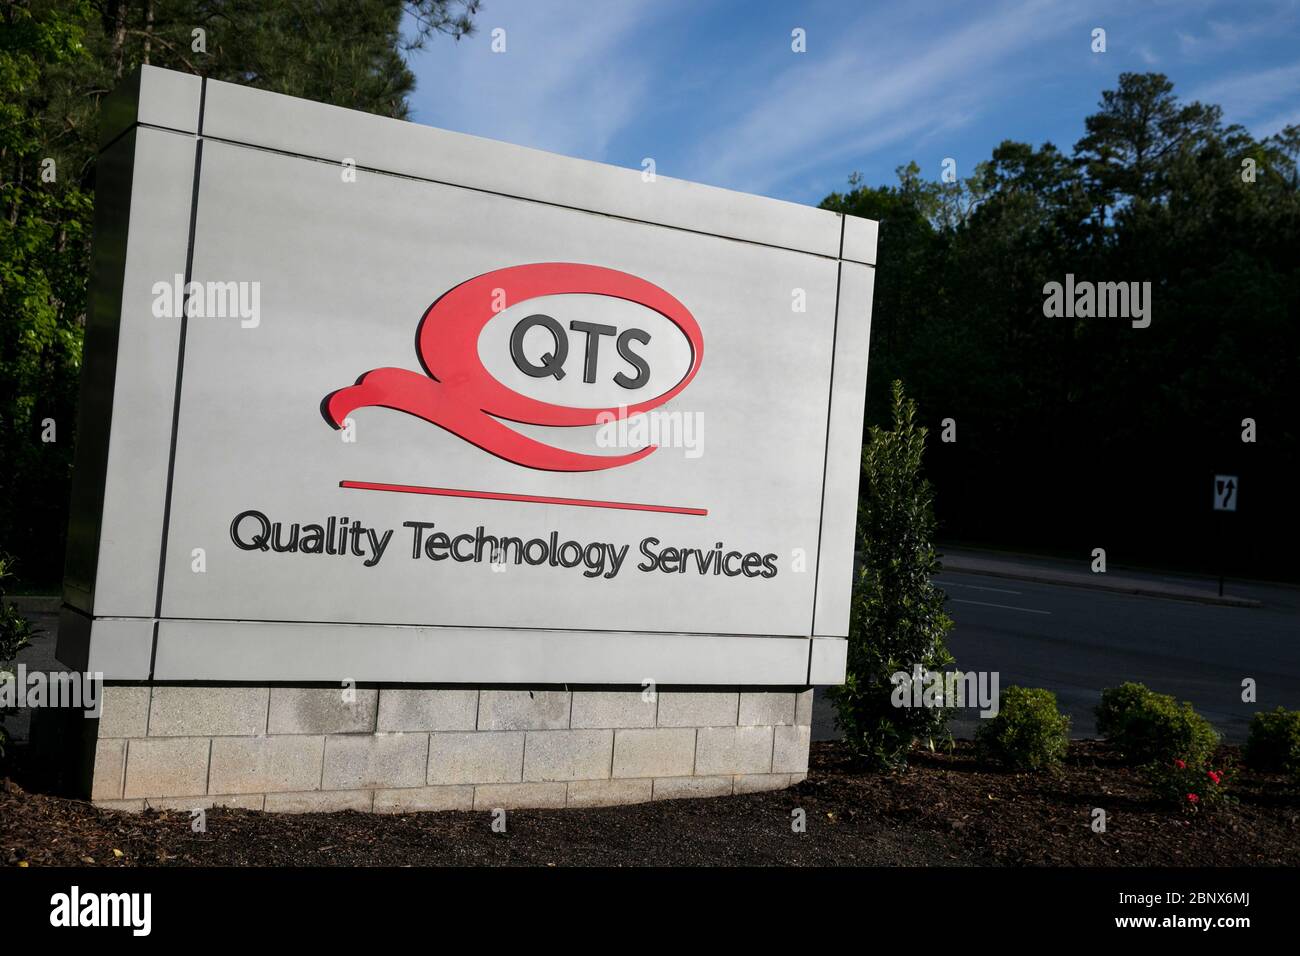 A logo sign outside of a Quality Technology Services (QTS) Data Center in Sandston, Virginia on May 2, 2020. Stock Photo